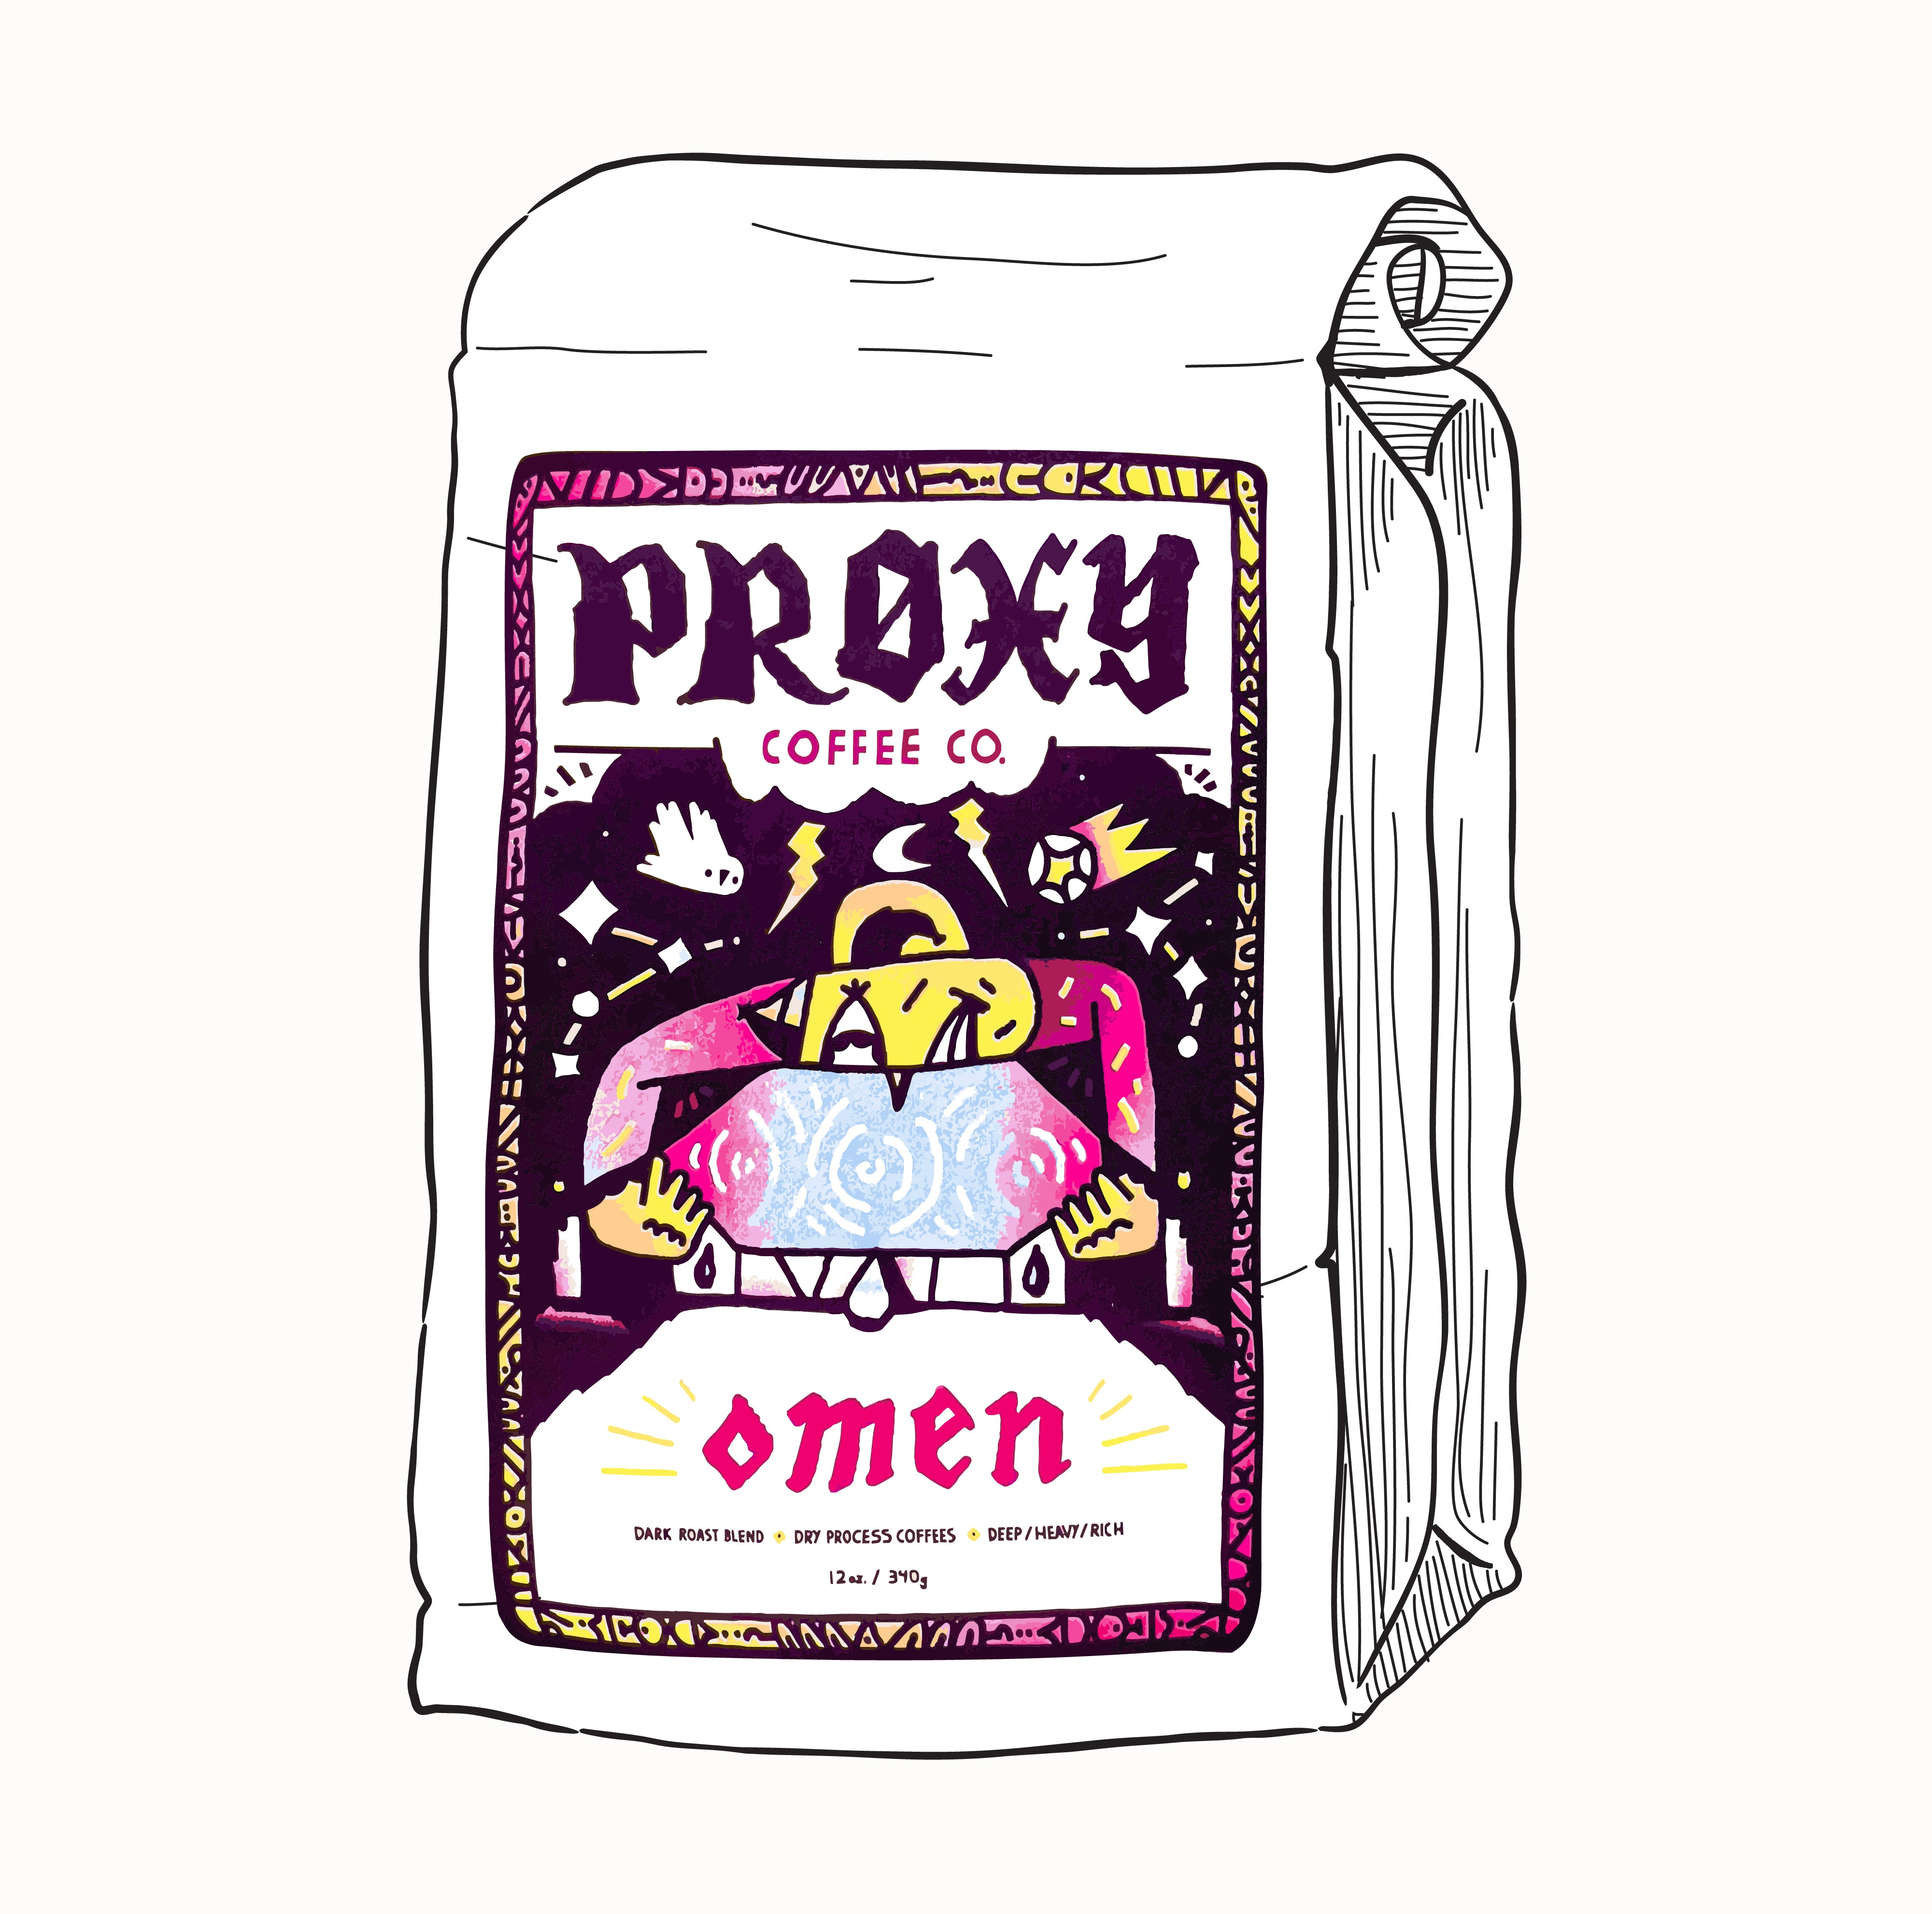 2D drawing of a bag of coffee with the Omen Blend label. Text on the bag of coffee reads: Proxy Coffee Co. Omen. Dark Roast Blend. Dry process coffees. Deep/Heavy/Rich.